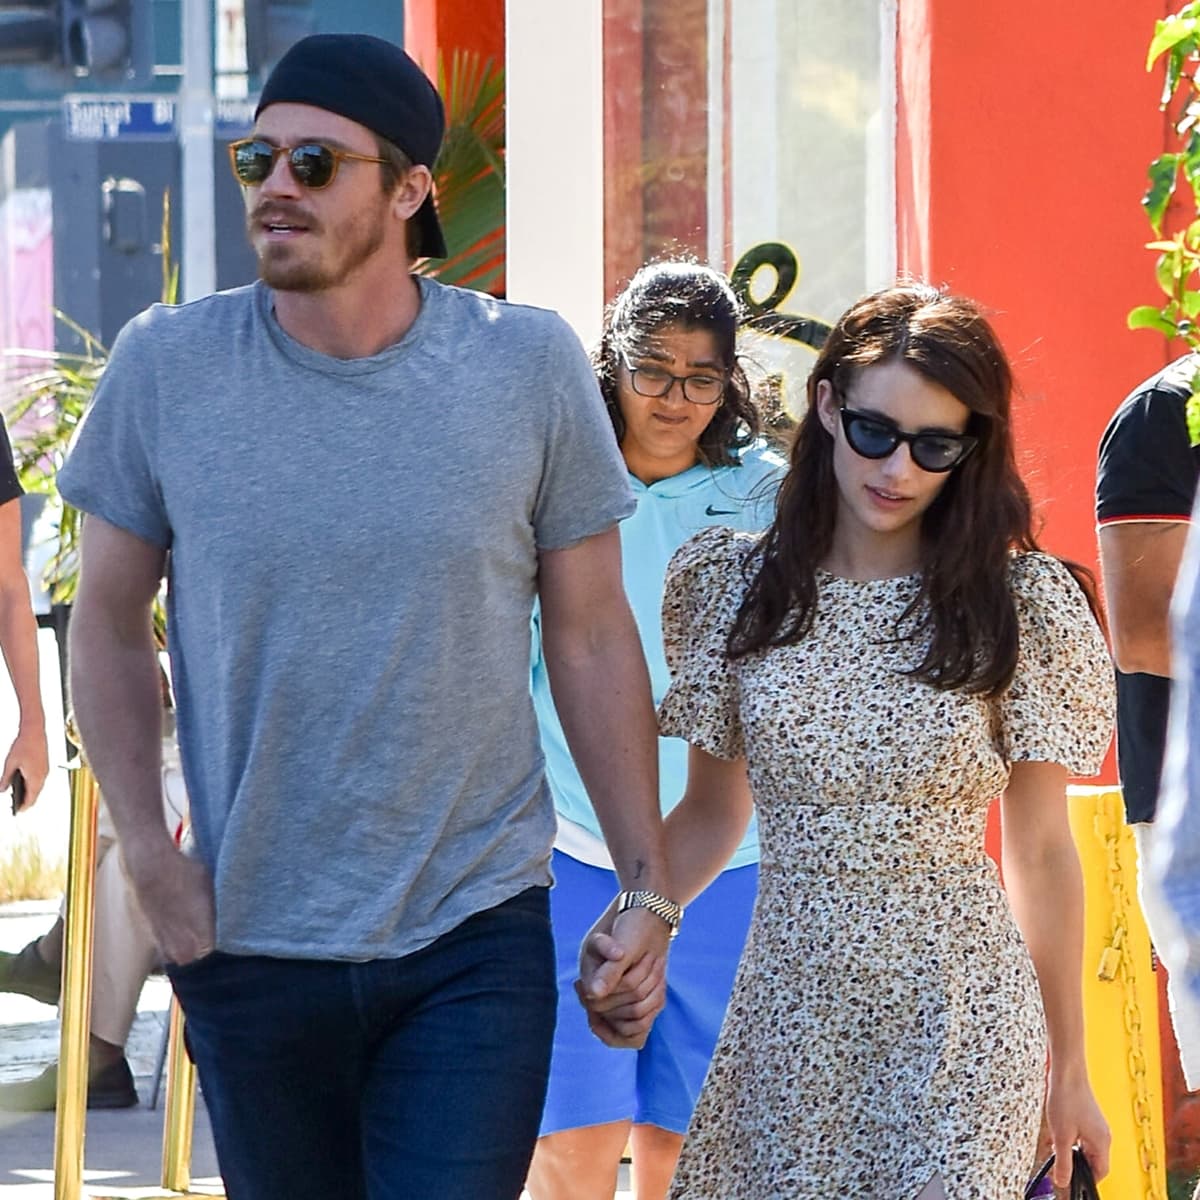 Emma Roberts and Garrett Hedlund split in late 2021 after dating for about three years